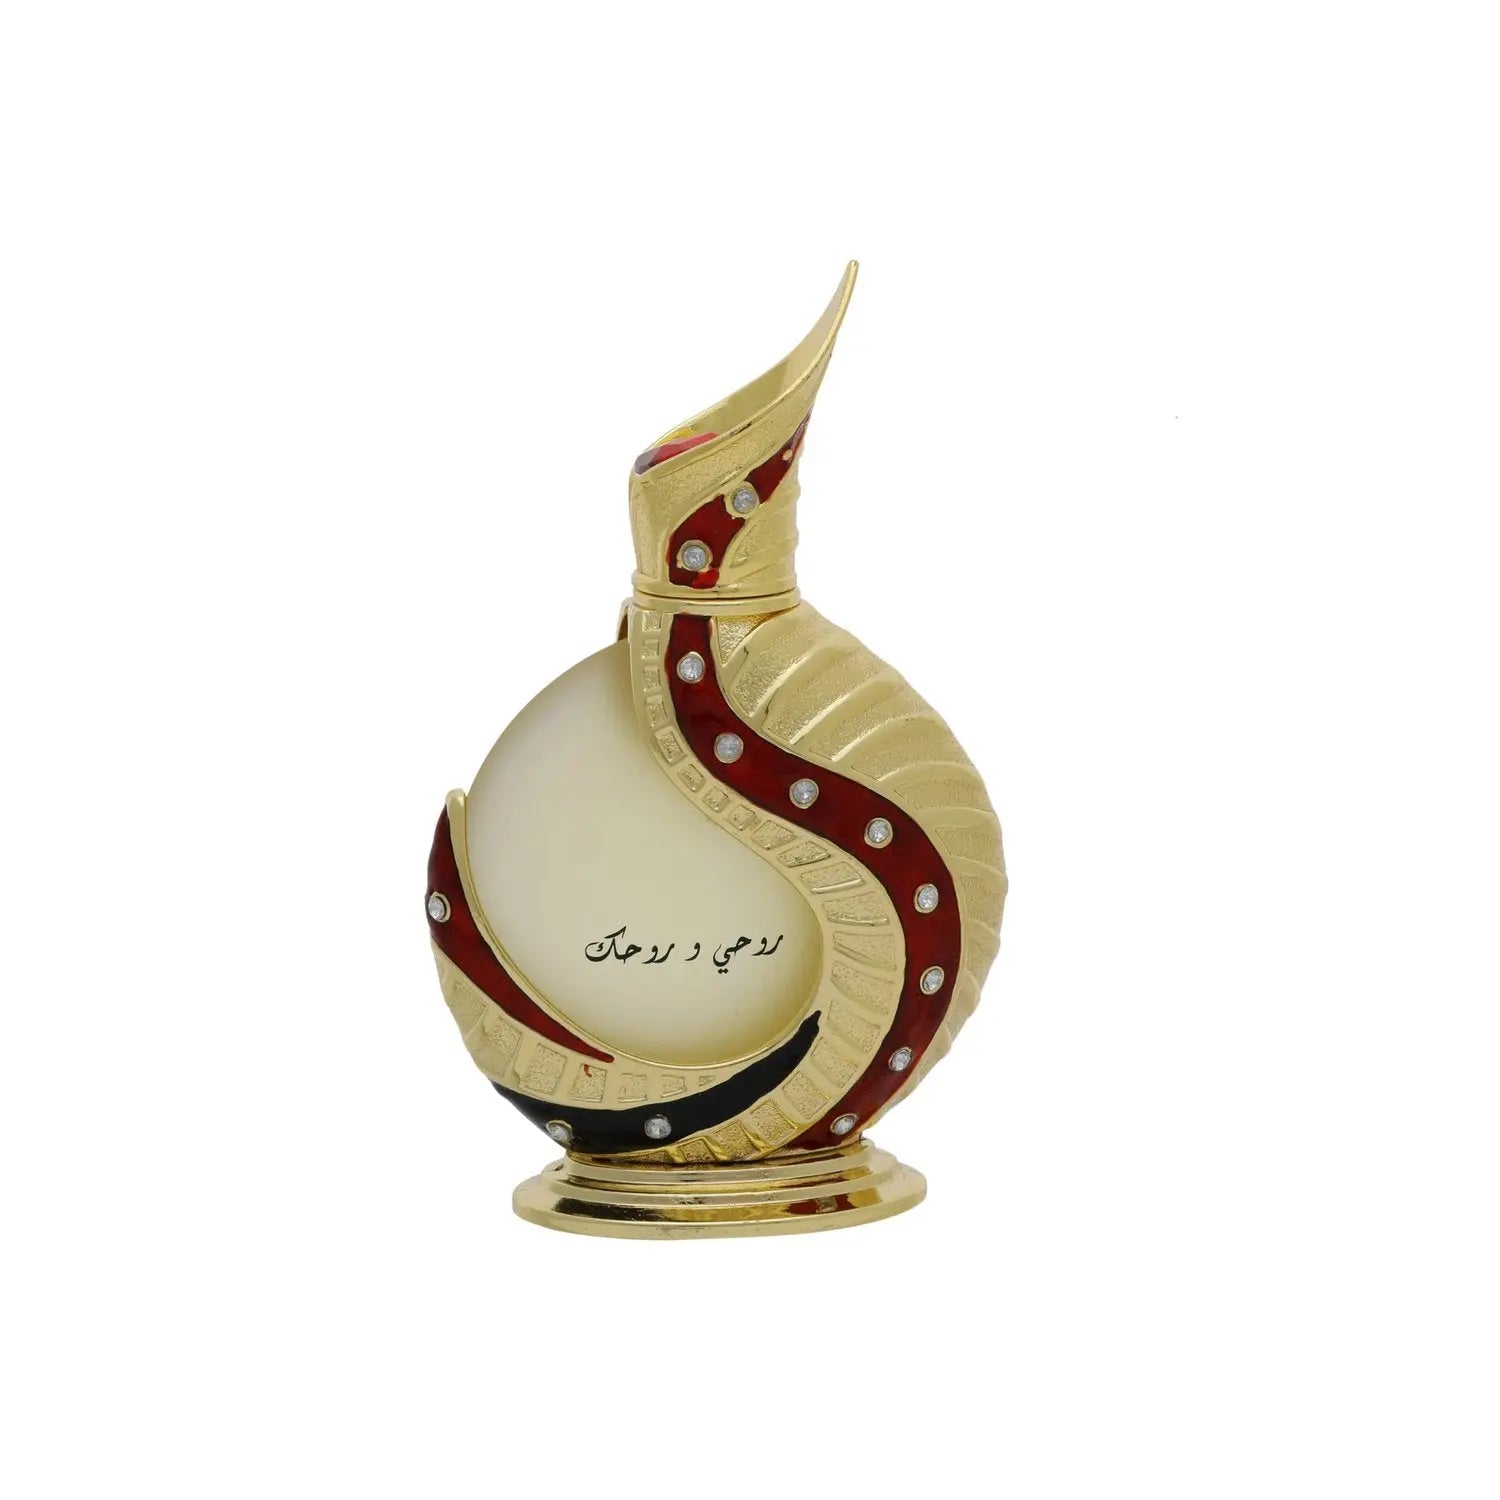 The image shows an intricately designed perfume bottle:  The bottle has a spherical base with a slender, curved neck that extends into a pointed tip, reminiscent of traditional Middle Eastern design. It is predominantly off-white with gold accents and features a decorative red swirl with embedded gem-like stones. Arabic calligraphy is displayed on the lower part of the bottle, adding to its cultural aesthetic. The bottle rests on a small, ornate gold stand.